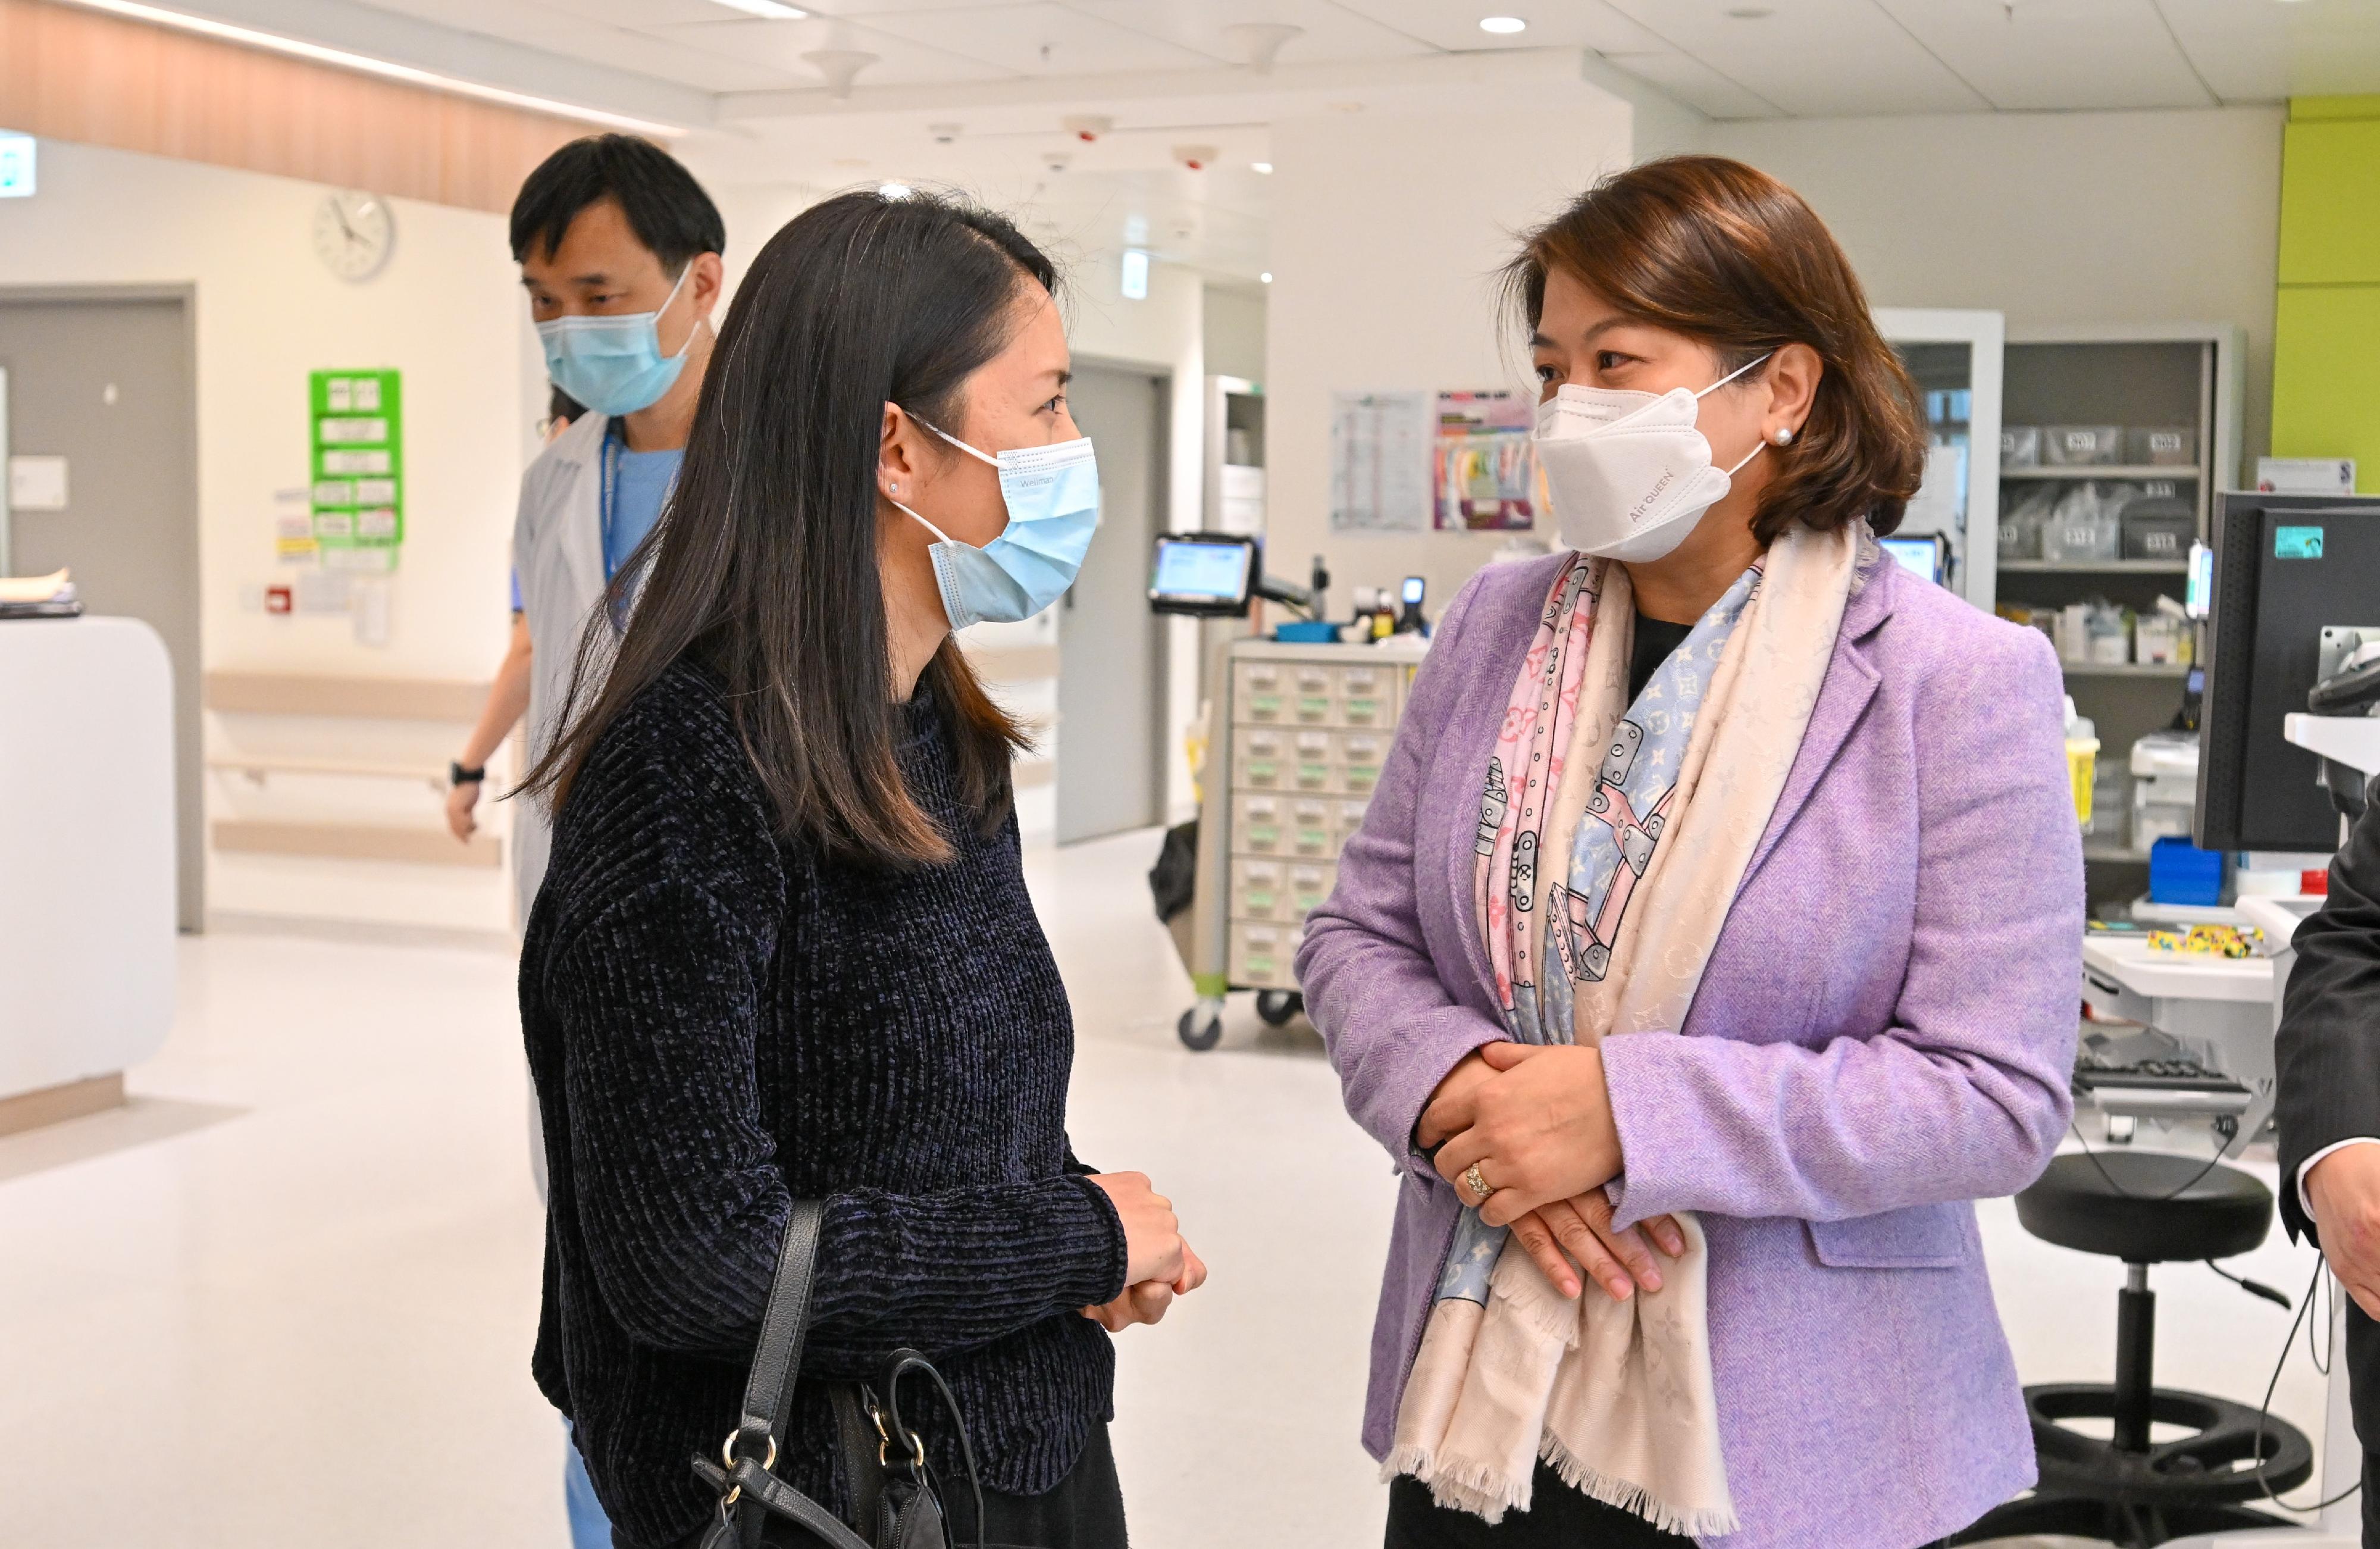 The Under Secretary for Health, Dr Libby Lee (right), visited Hong Kong Children’s Hospital today (December 23) and chatted with the mother of the 4-month-old baby girl, Tsz-hei, who underwent a heart transplant operation earlier.